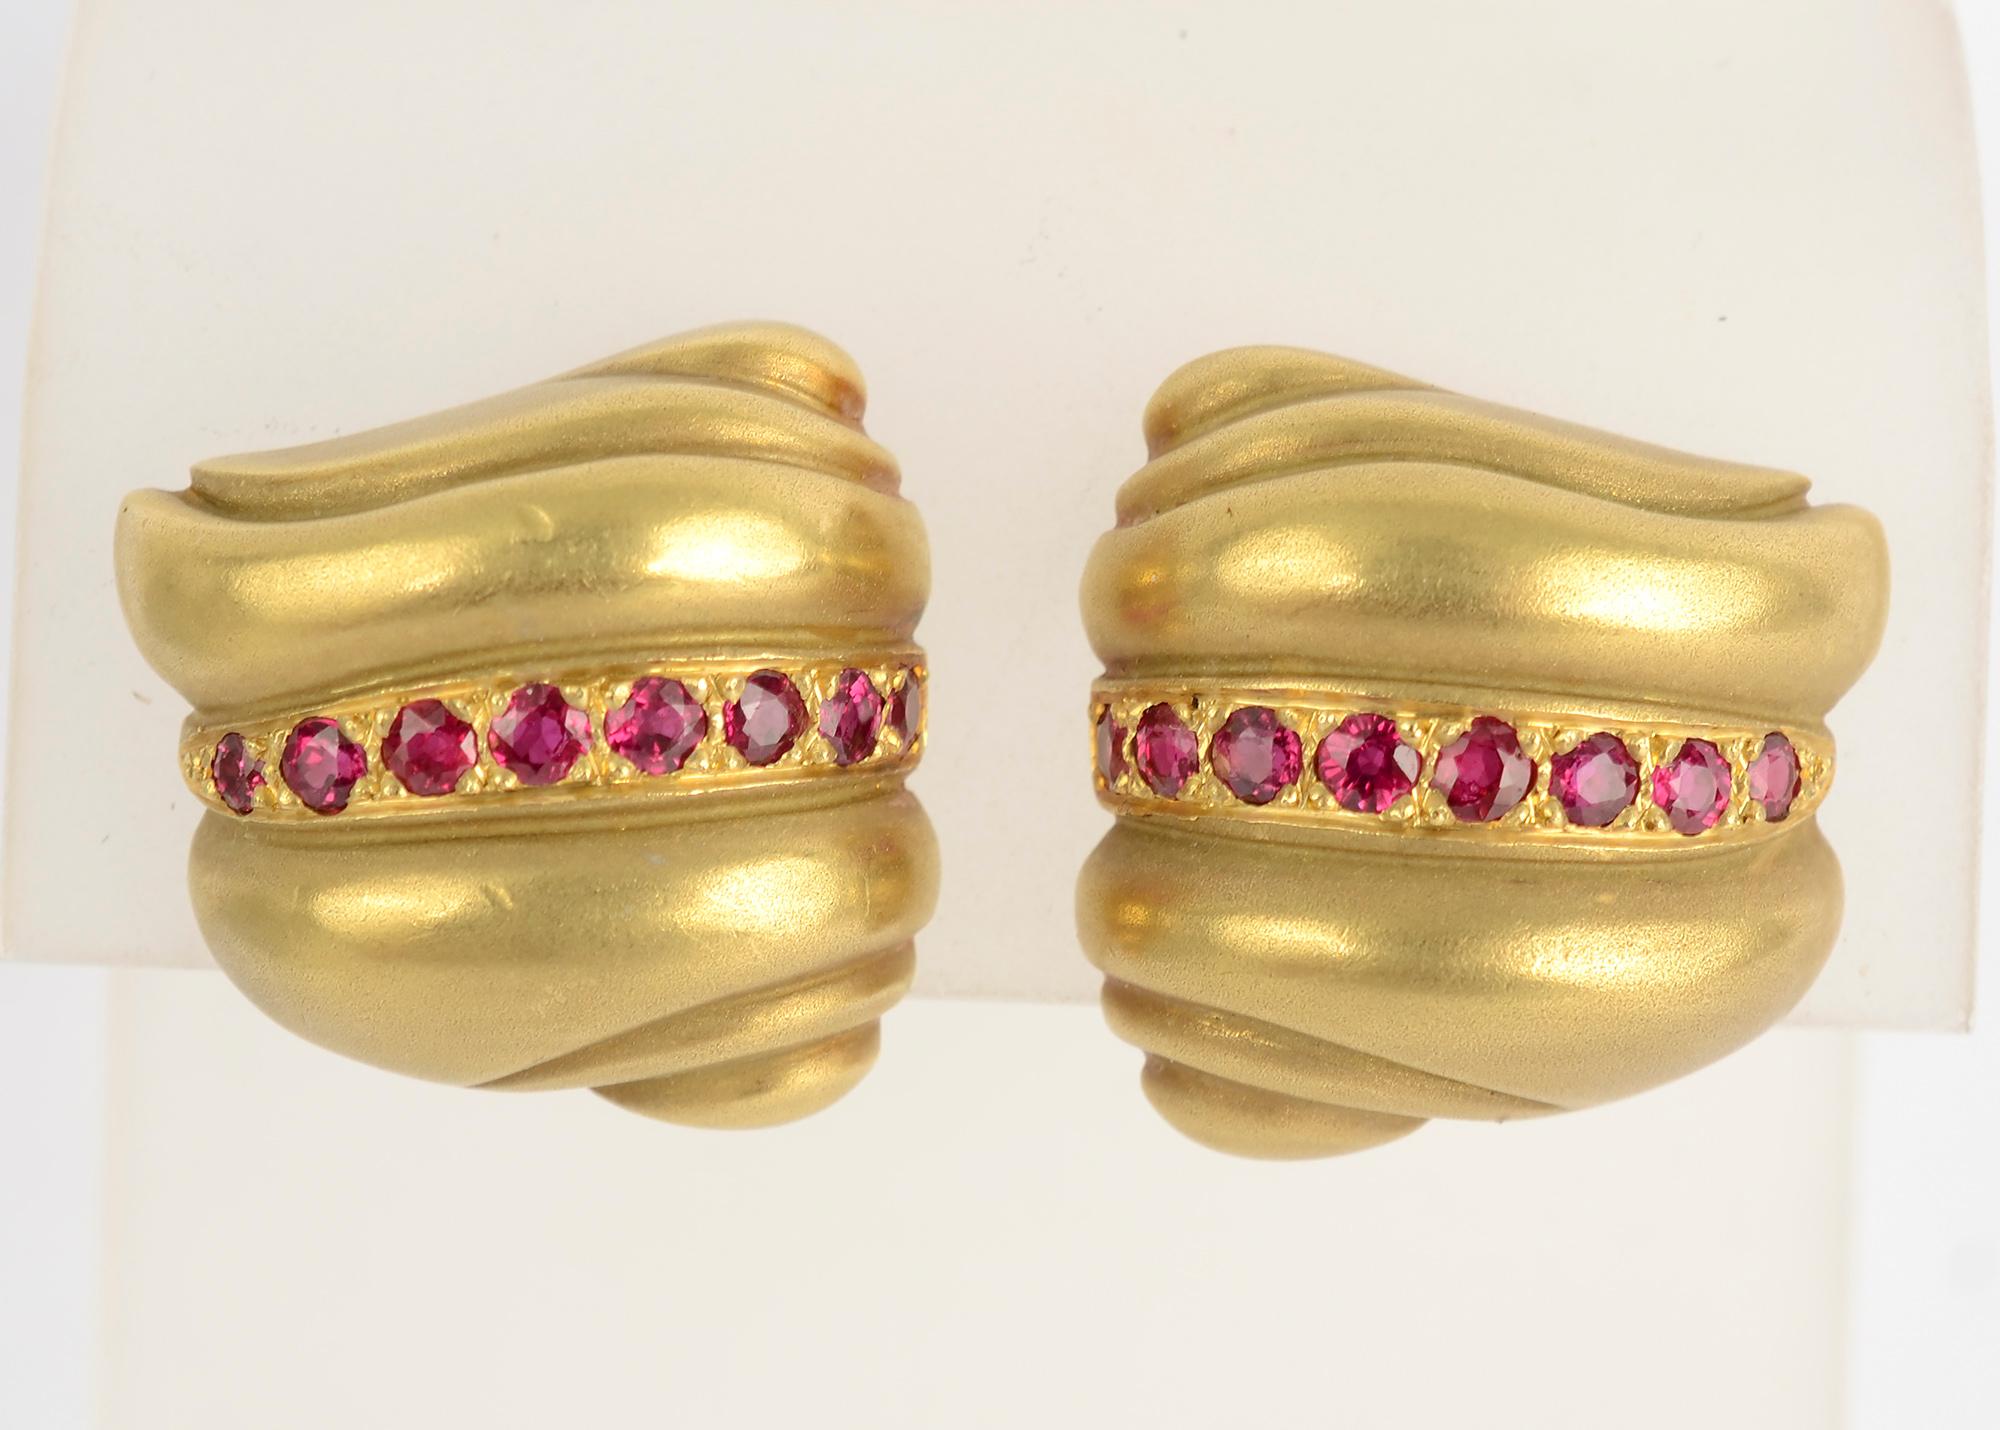 This is an unusual pair of gold earrings by Barry Kieselstein Cord. Rarely did he incorporate rubies in his work. The gold has the three dimensional, sculptural quality he often favored.
The earrings are 7/8